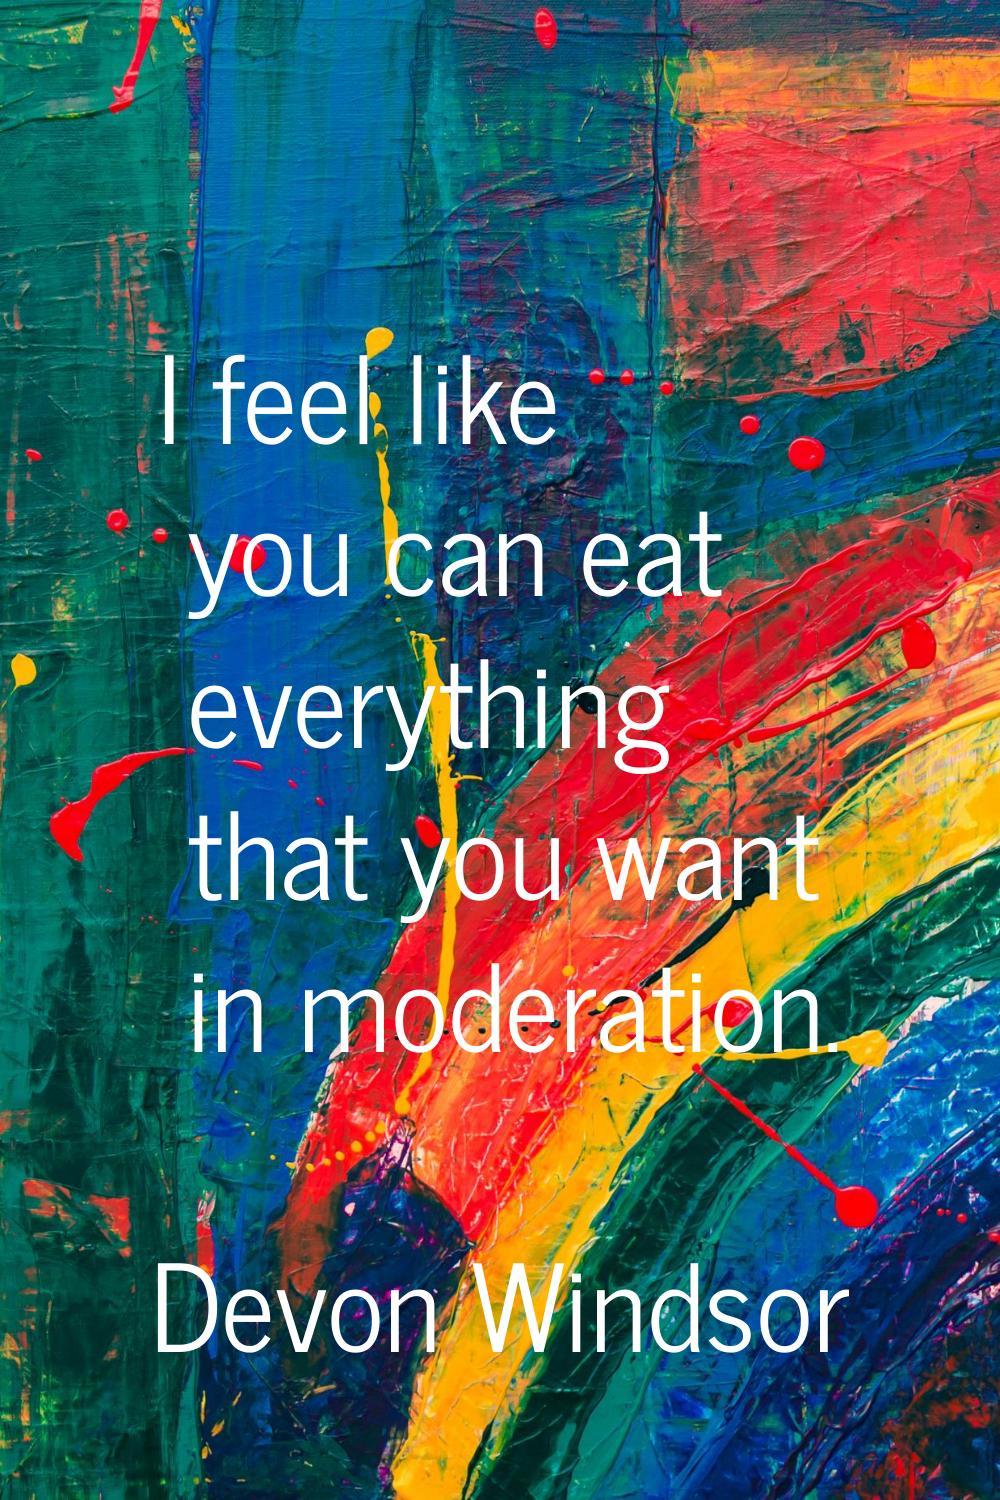 I feel like you can eat everything that you want in moderation.